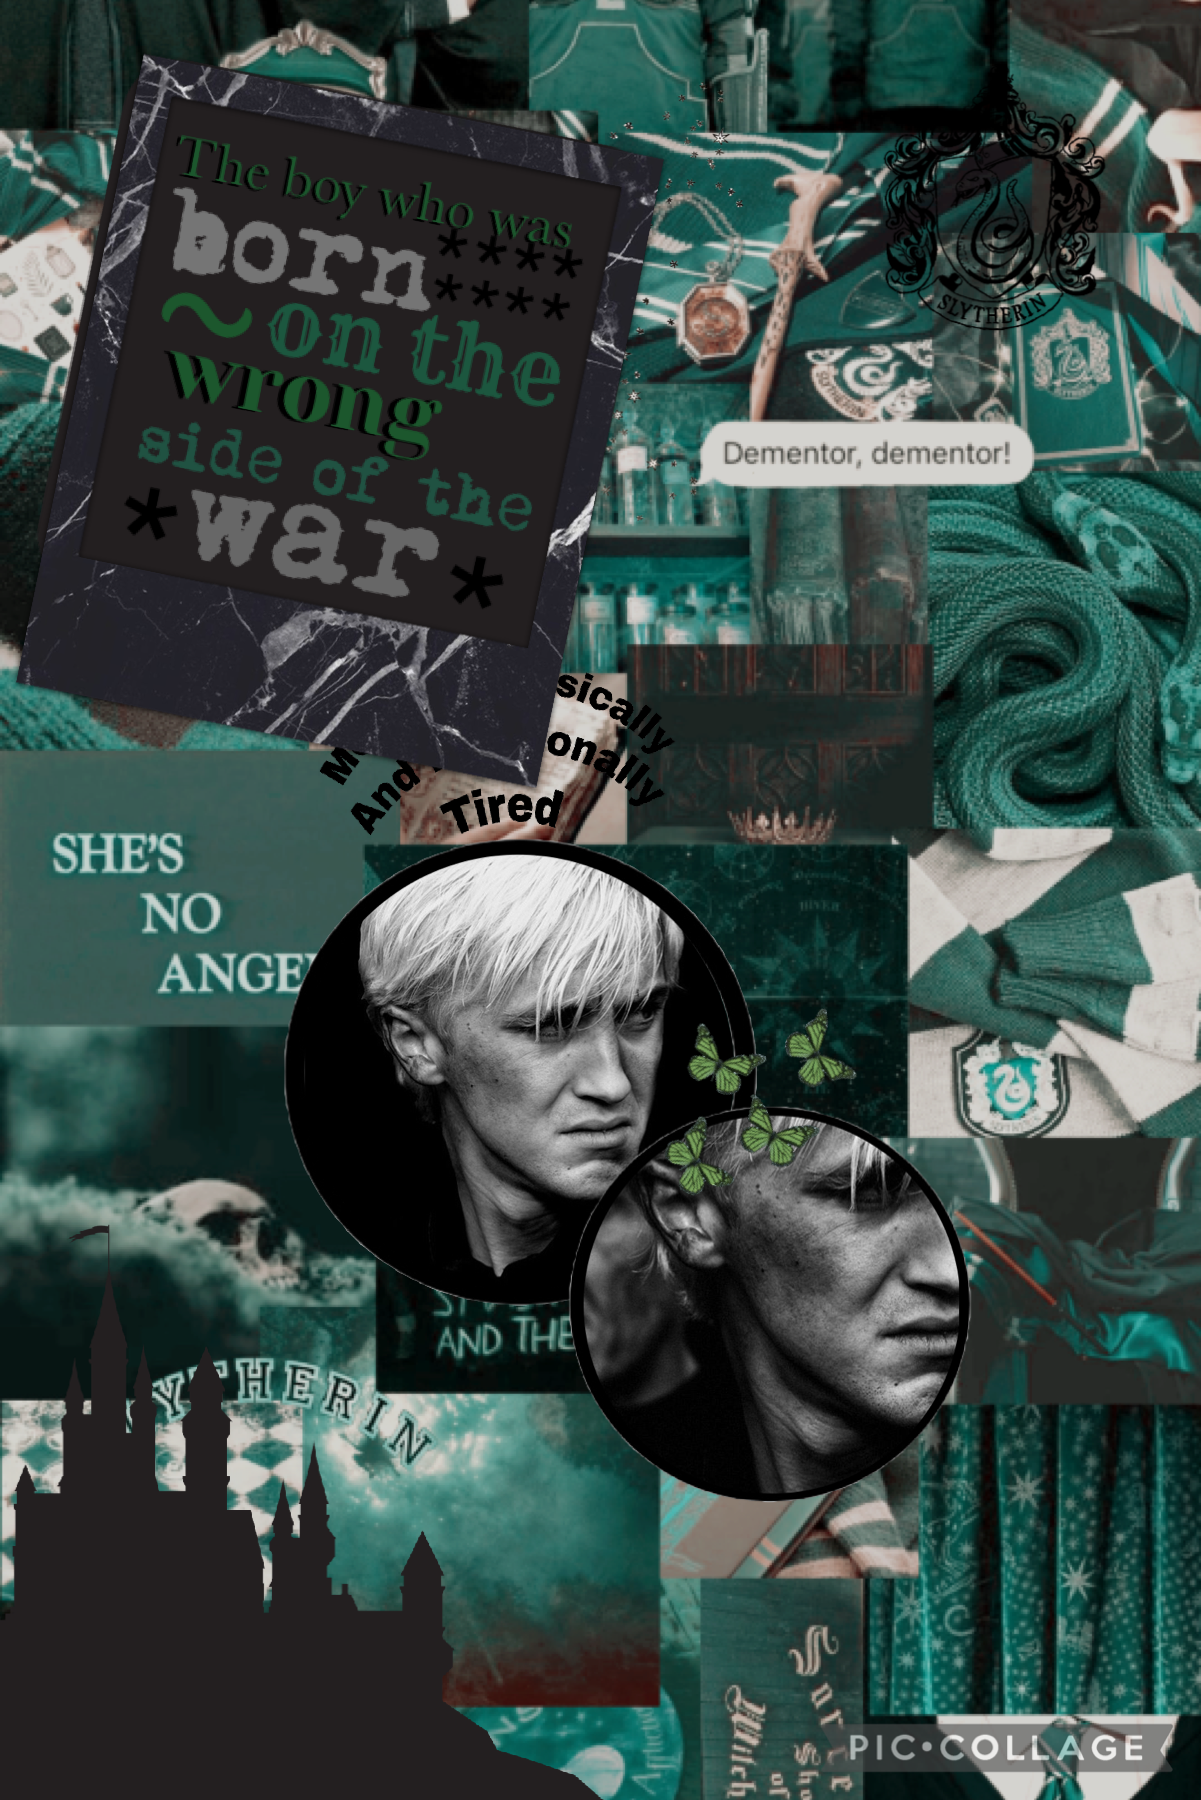 tap🌪🖤🐍

slytherin prideeeee +sad draco malfoy😢 like how many times do people have to hear it, he was NOT evil, just born on the wrong side of the war qotd-harry potter house? aotd-slytherin🐍